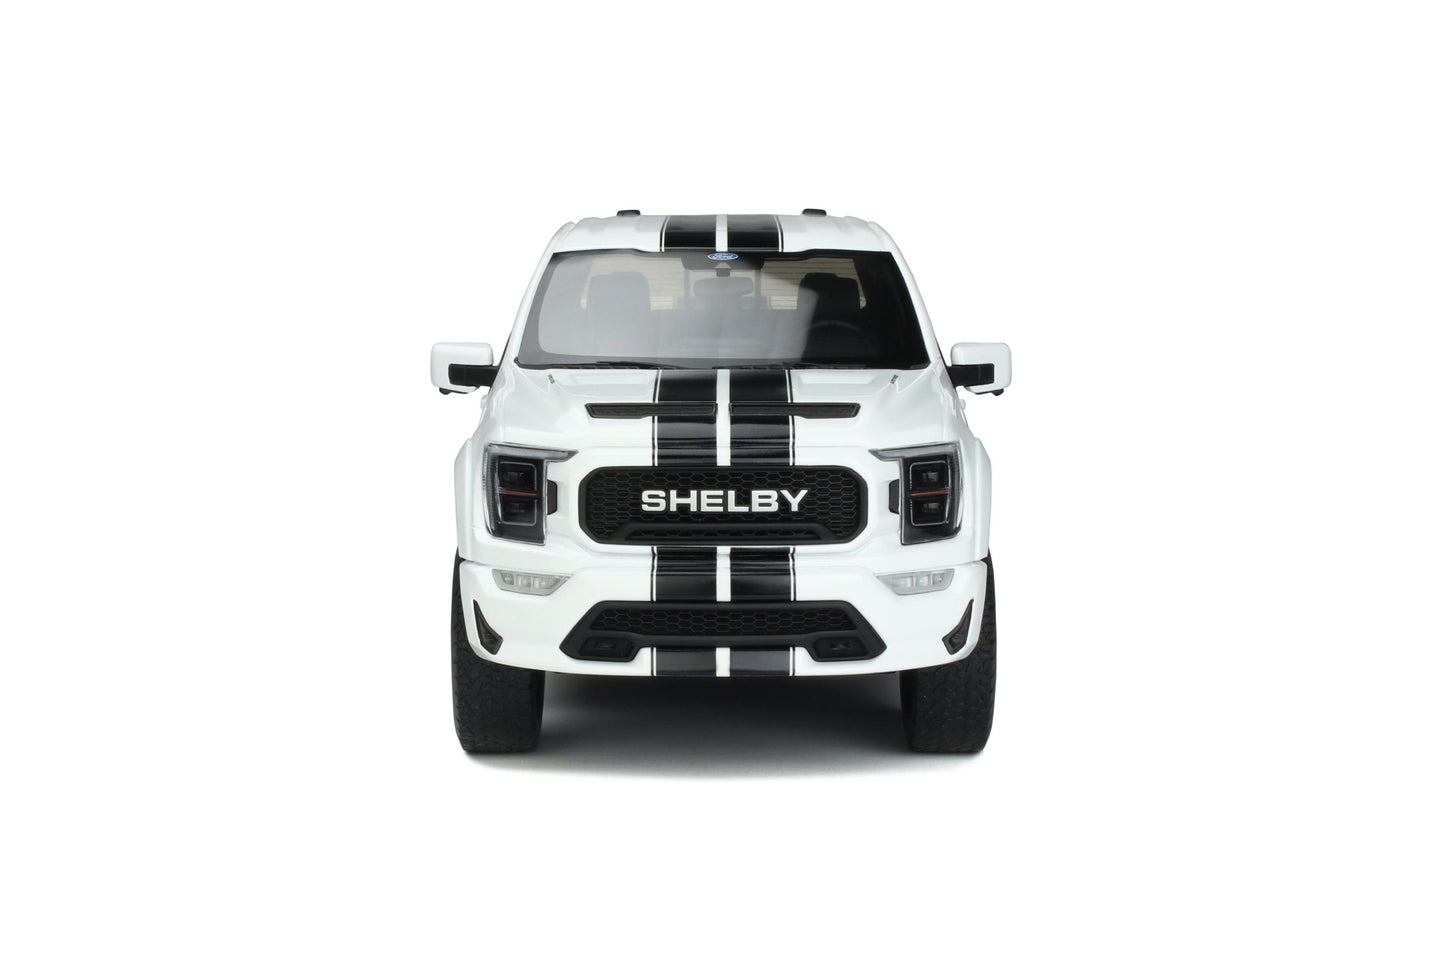 GT Spirit - Shelby Ford F150 "Off-Road" (Star White) 1:18 Scale Model Car